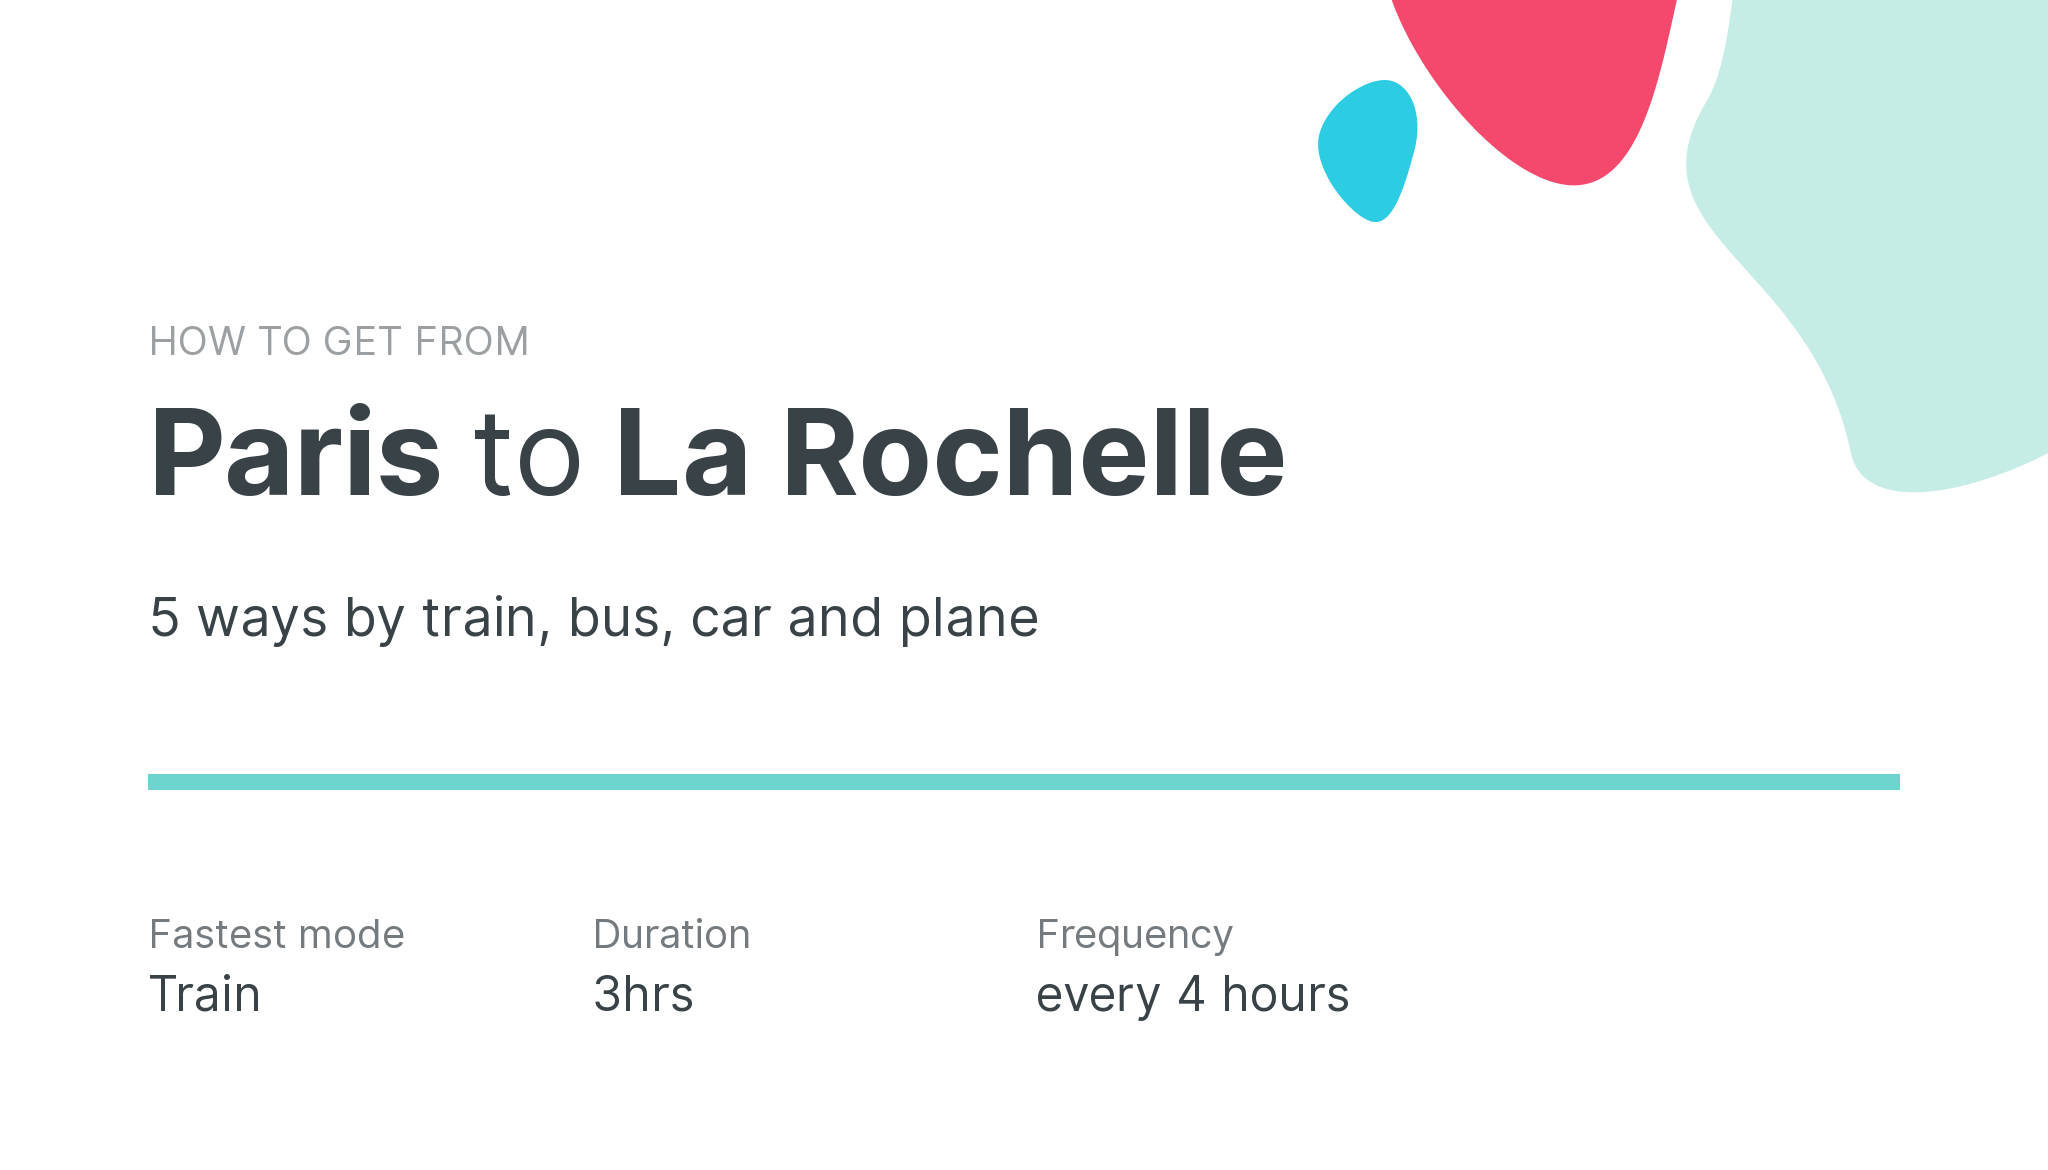 How do I get from Paris to La Rochelle